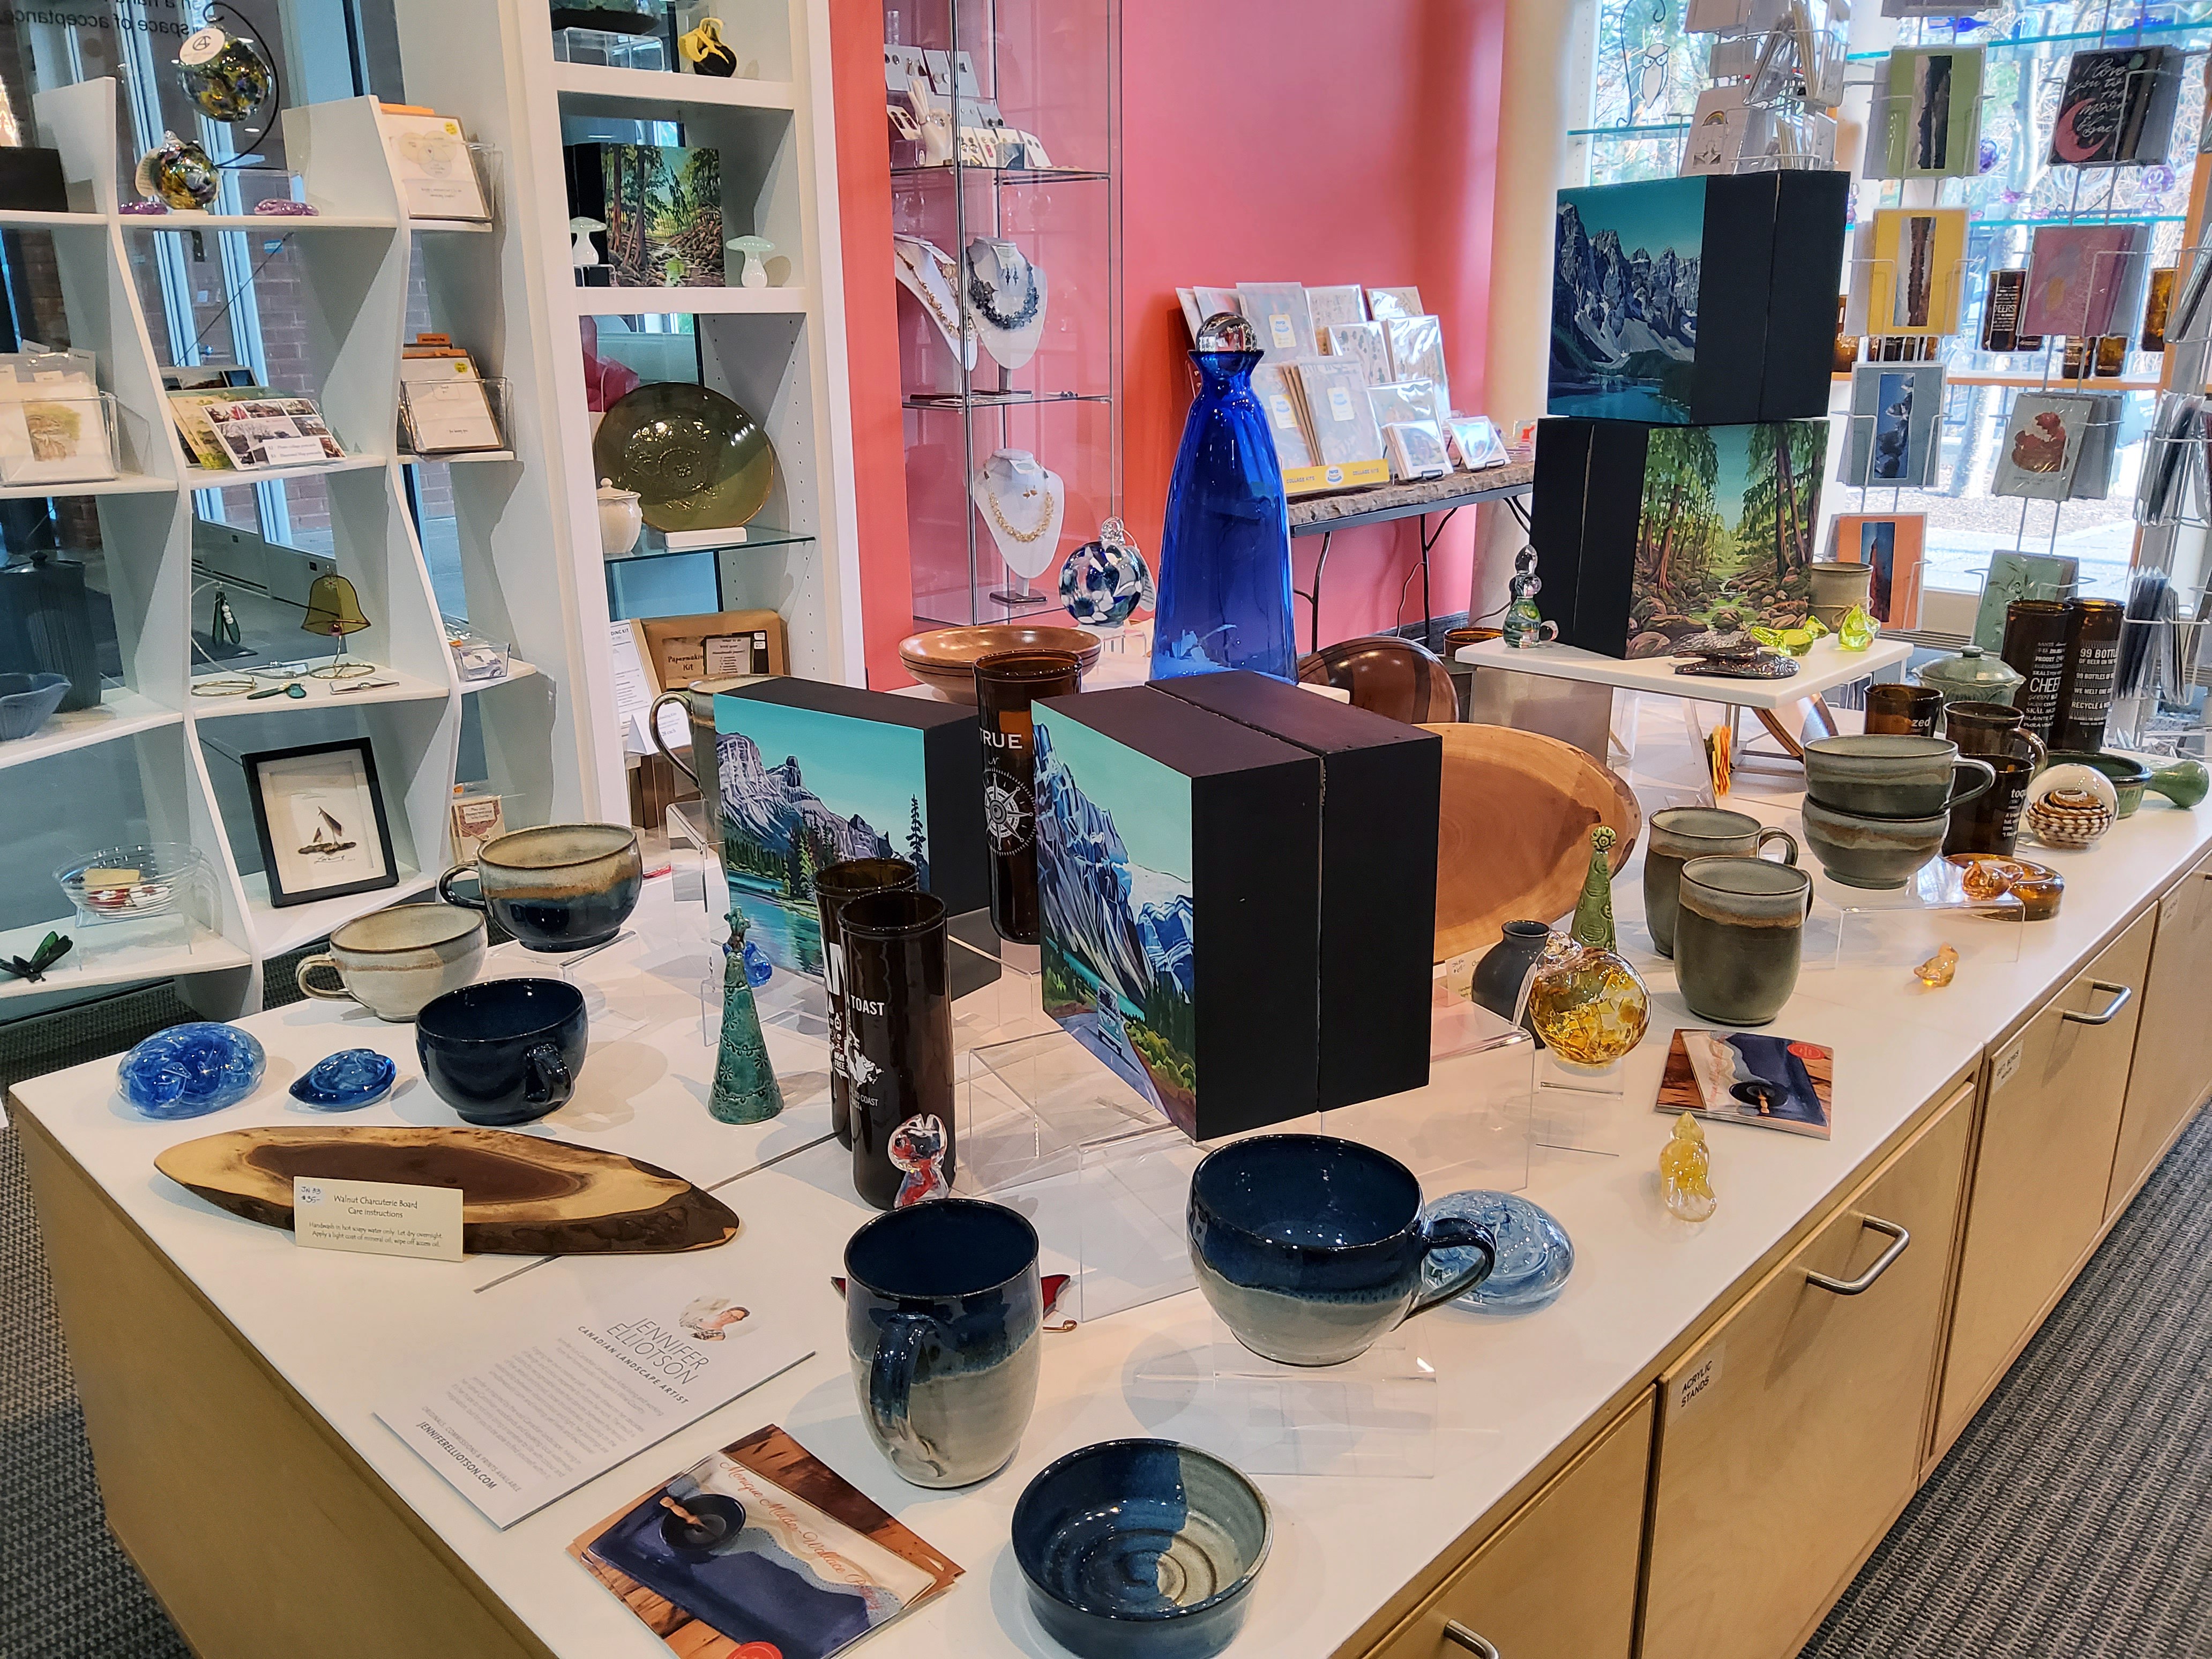 white shelving and display tables displaying various handmade items including pottery, handblown glass, greeting cards, jewellery, handcarved wood bowls and more